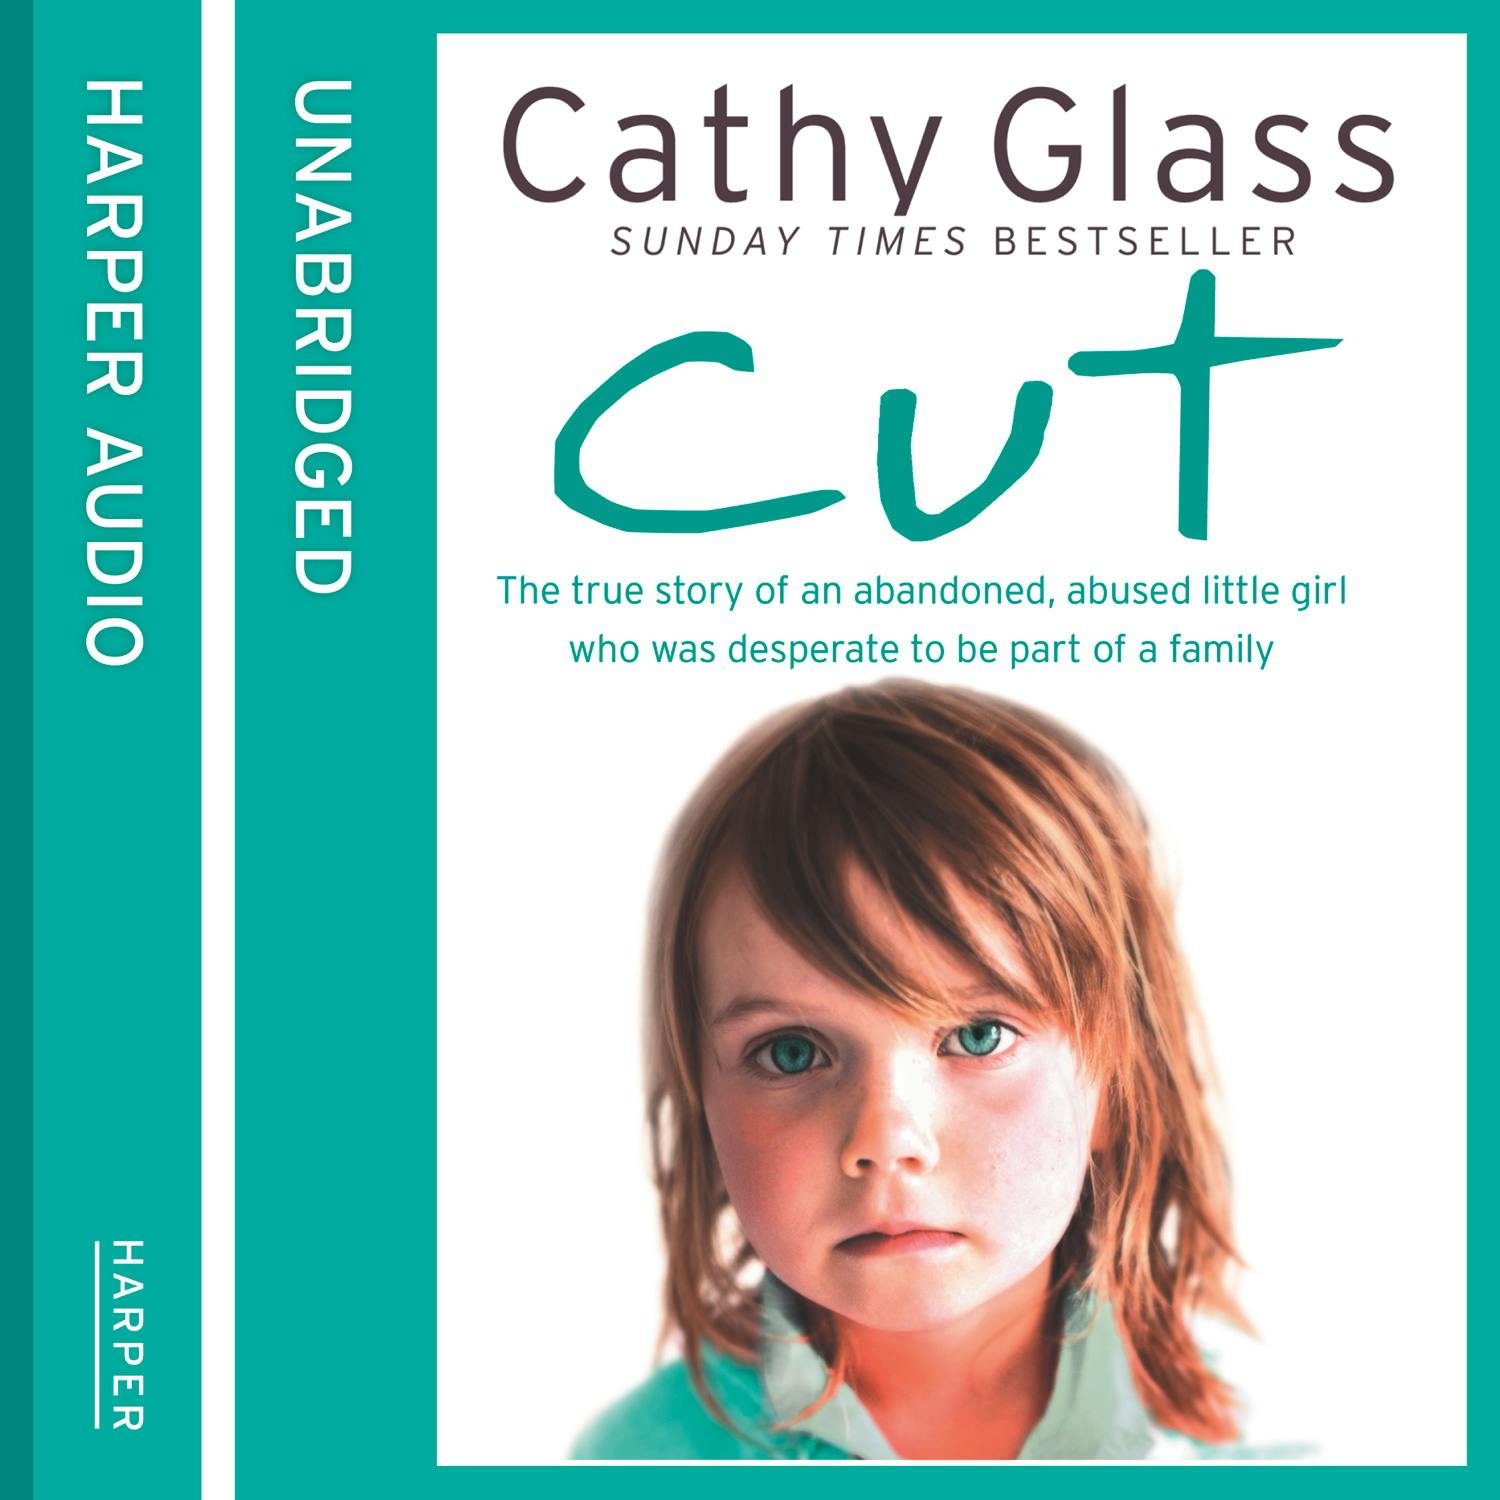 Cut: The true story of an abandoned, abused little girl who was desperate to be part of a family - Cathy Glass